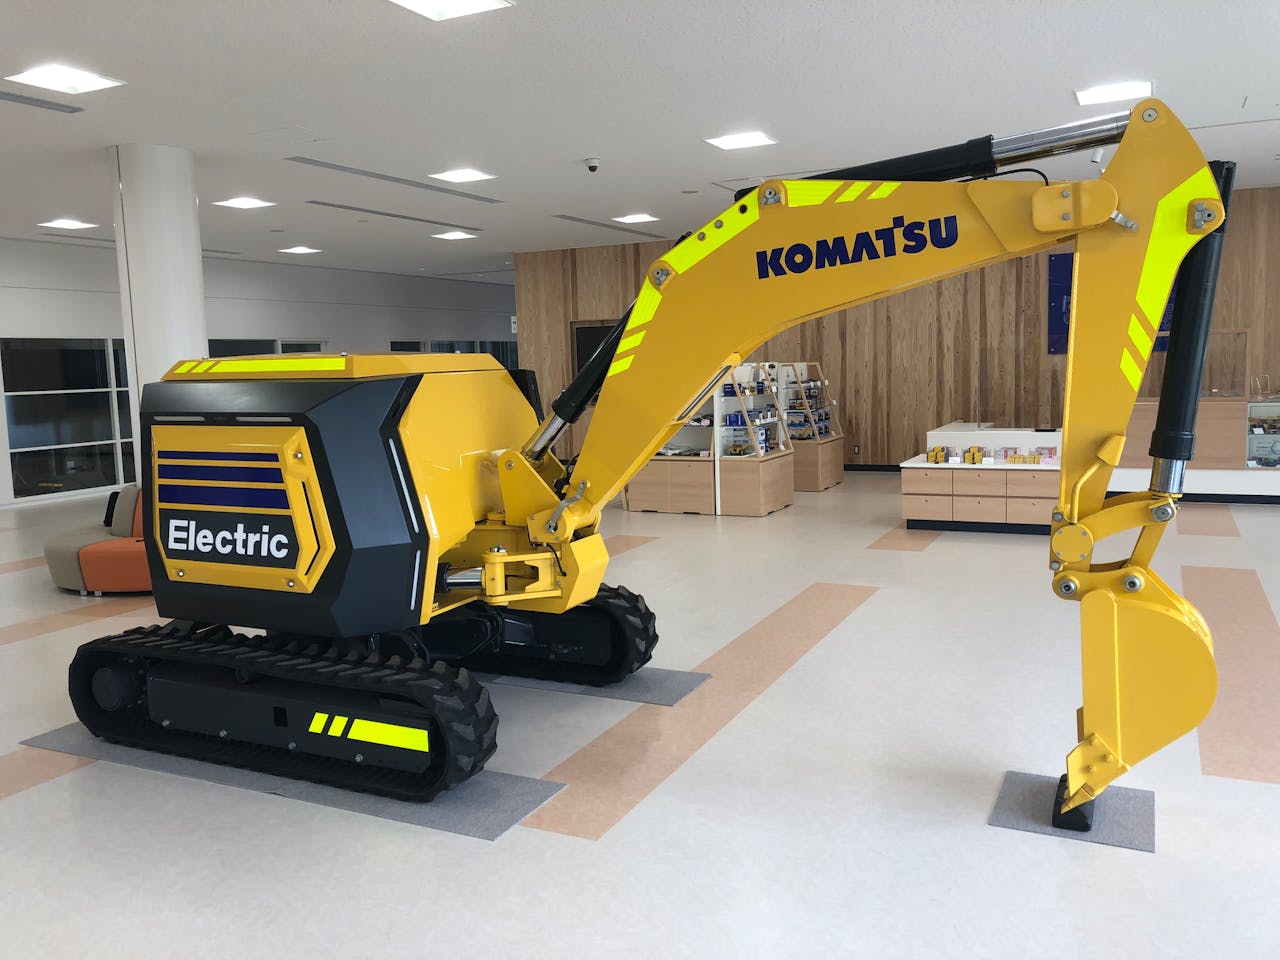 The starting point for most OEMs has been and will continue to be smaller compact machines, whose duty-cycle requirements are relatively light. Shown is a Komatsu electric prototype.